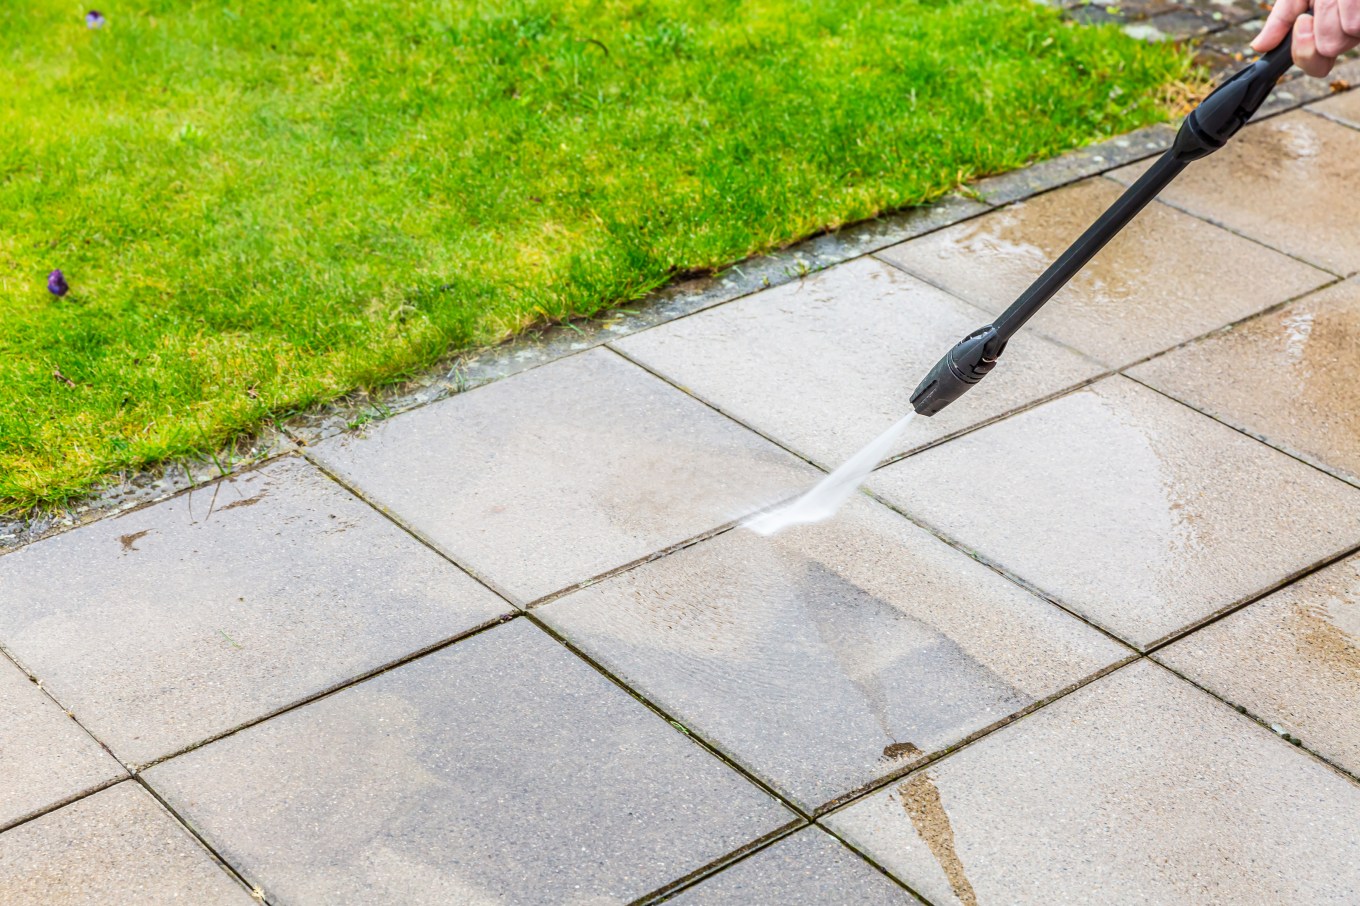 High-powered water cleaning of the resurfaced paving stones of a patio.